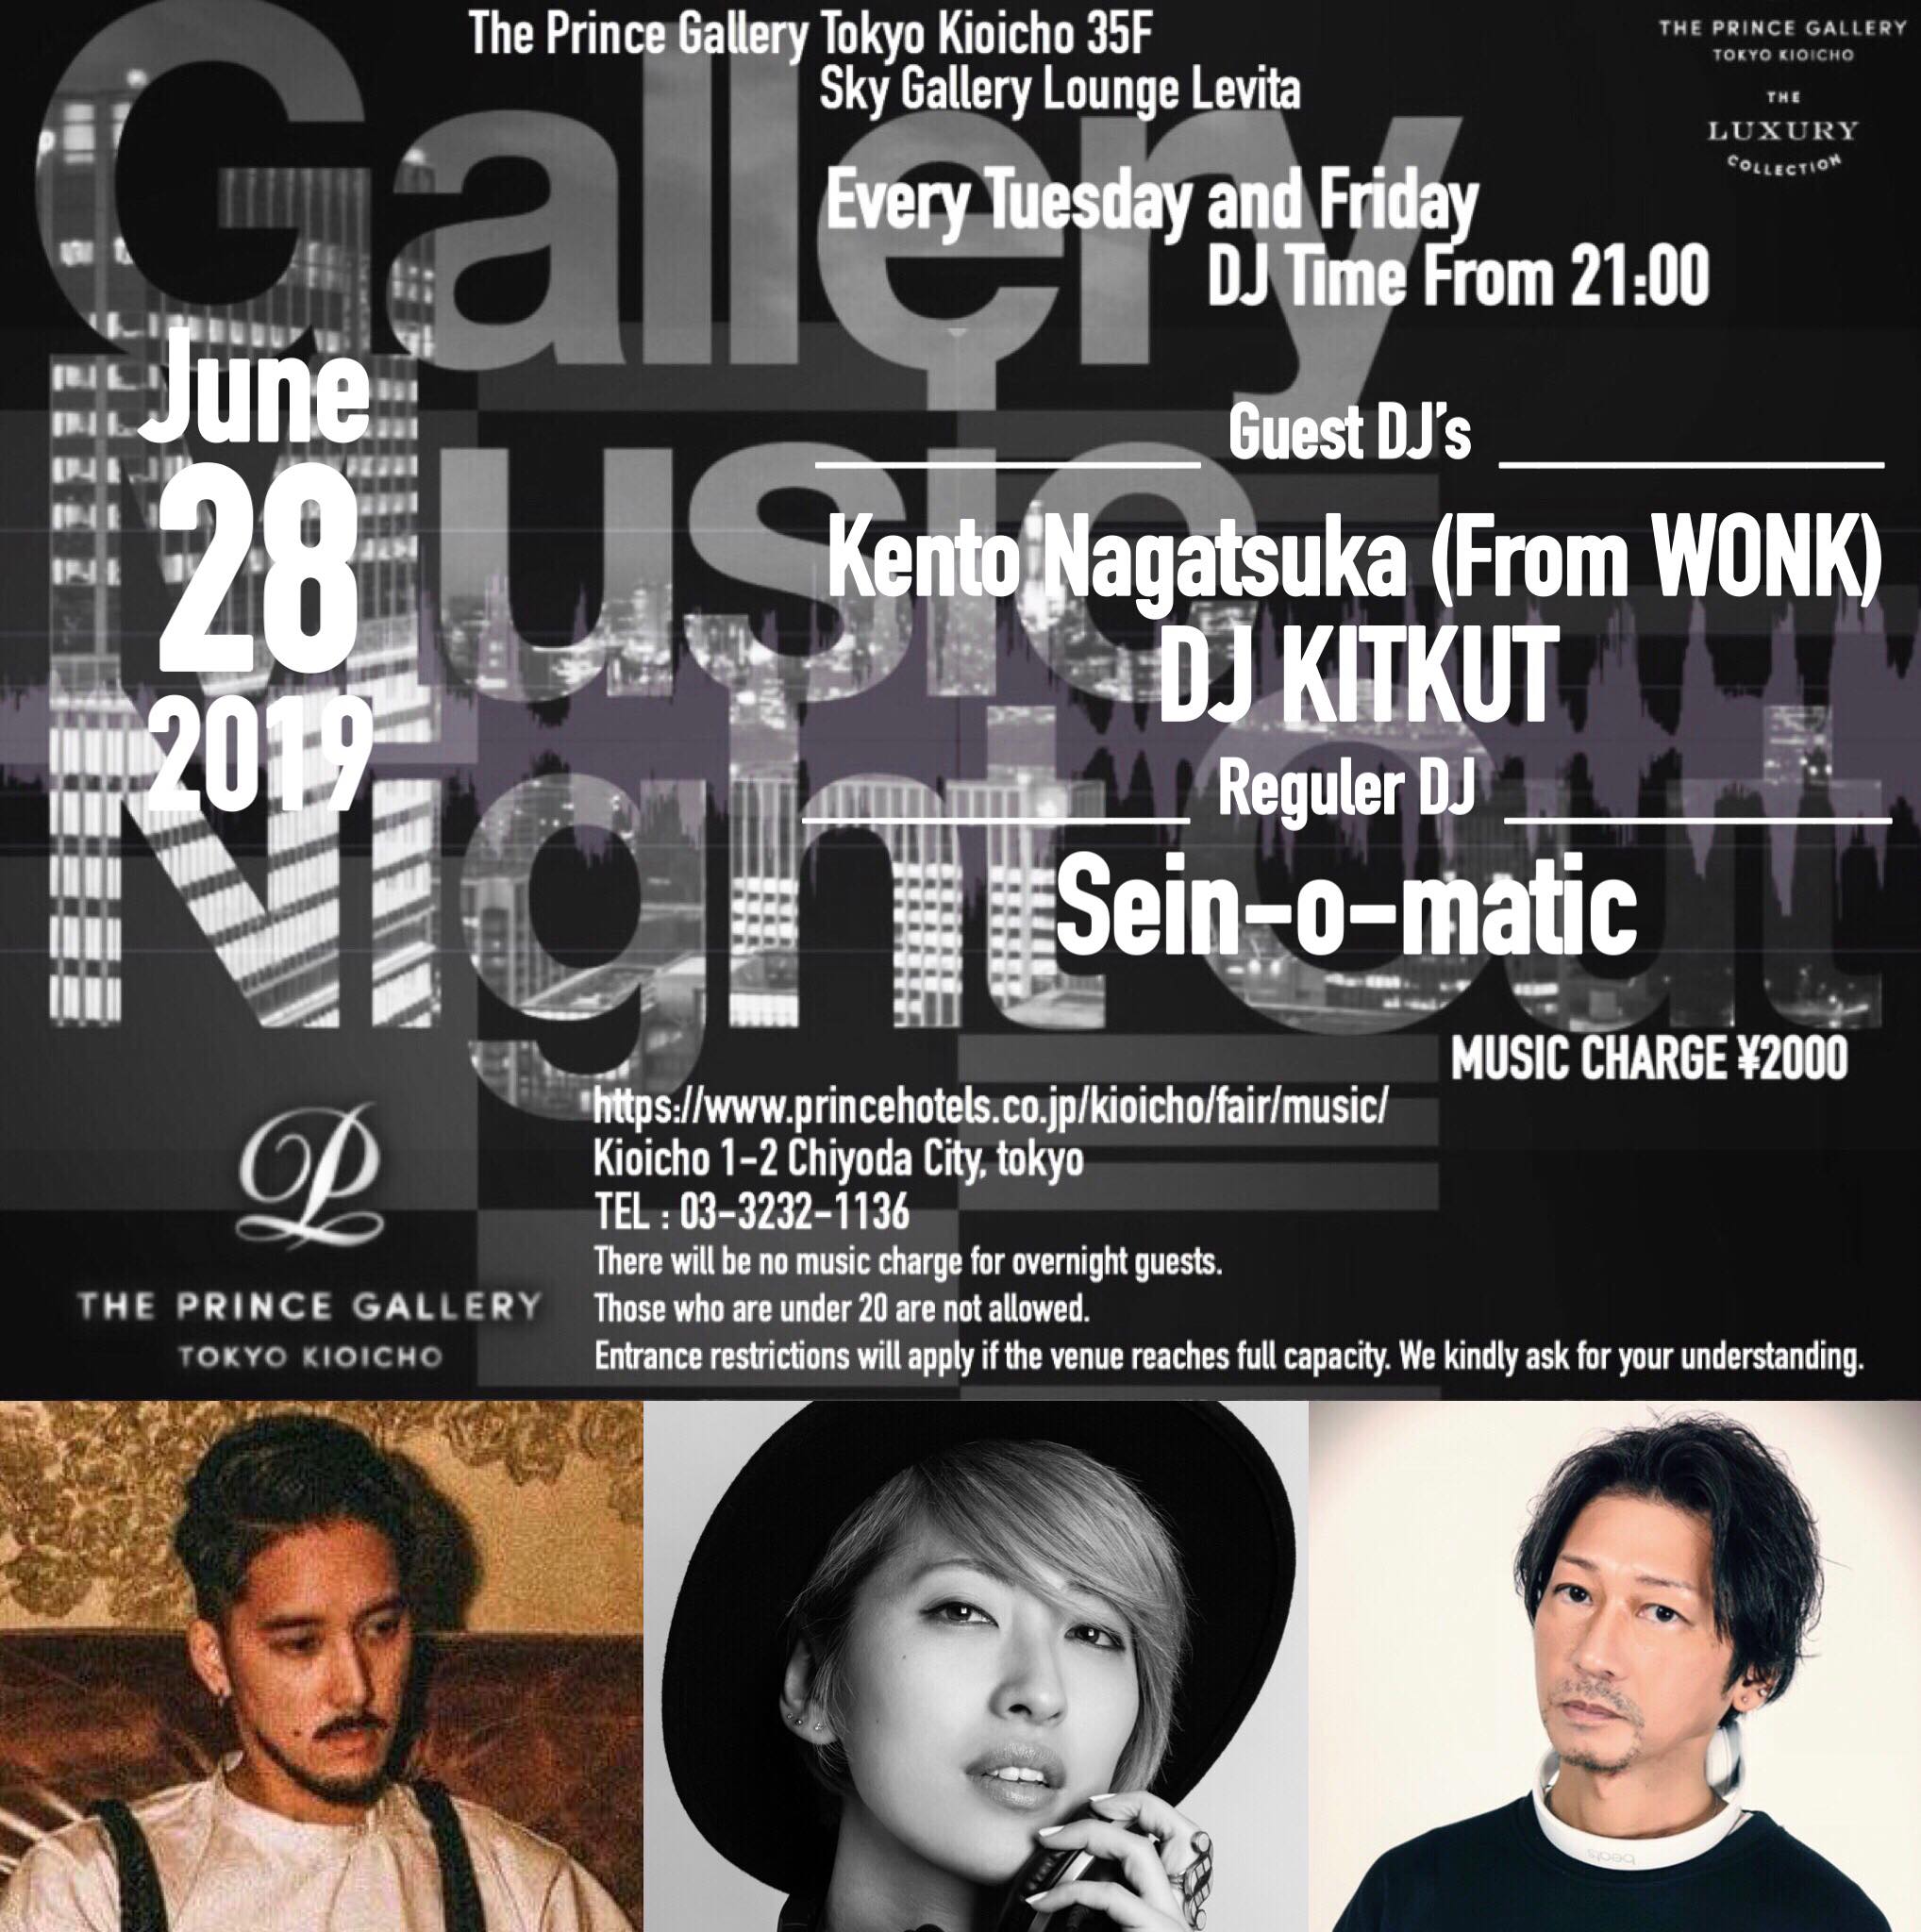 2019/6/28(fri) Gallery Music Night Out @ The Prince Gallery